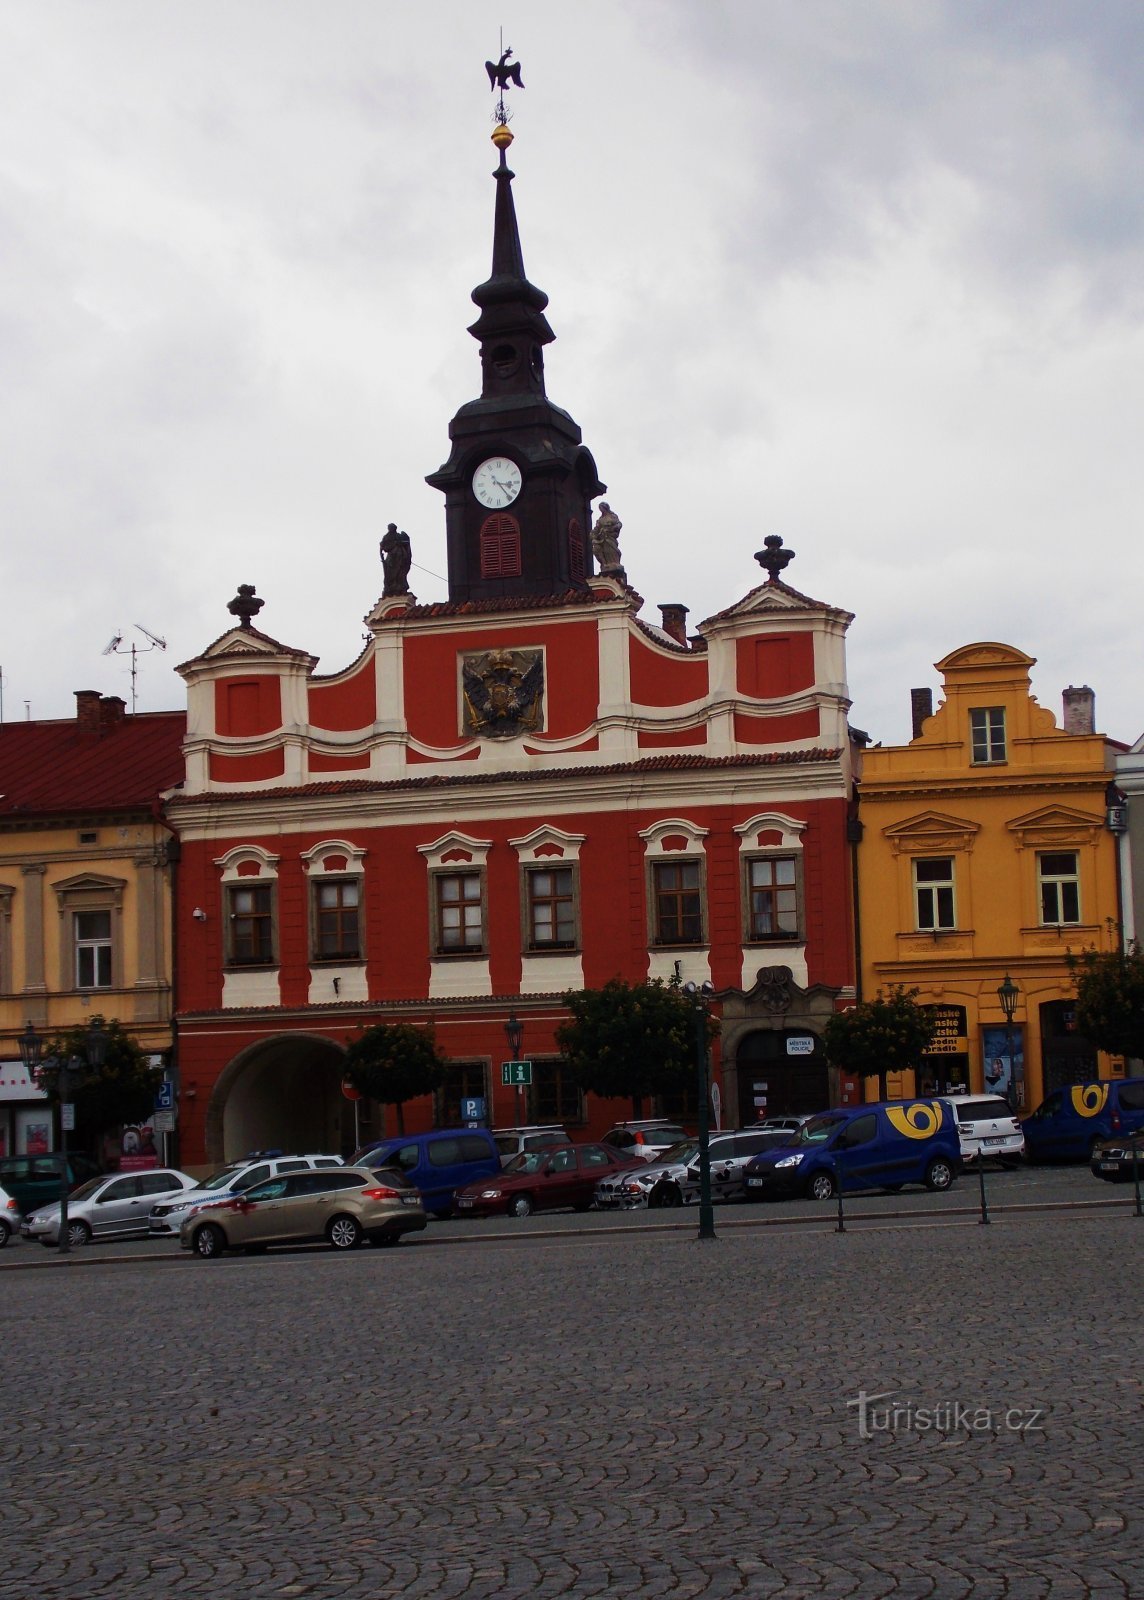 The old town hall on Ressel Square in Chrudim